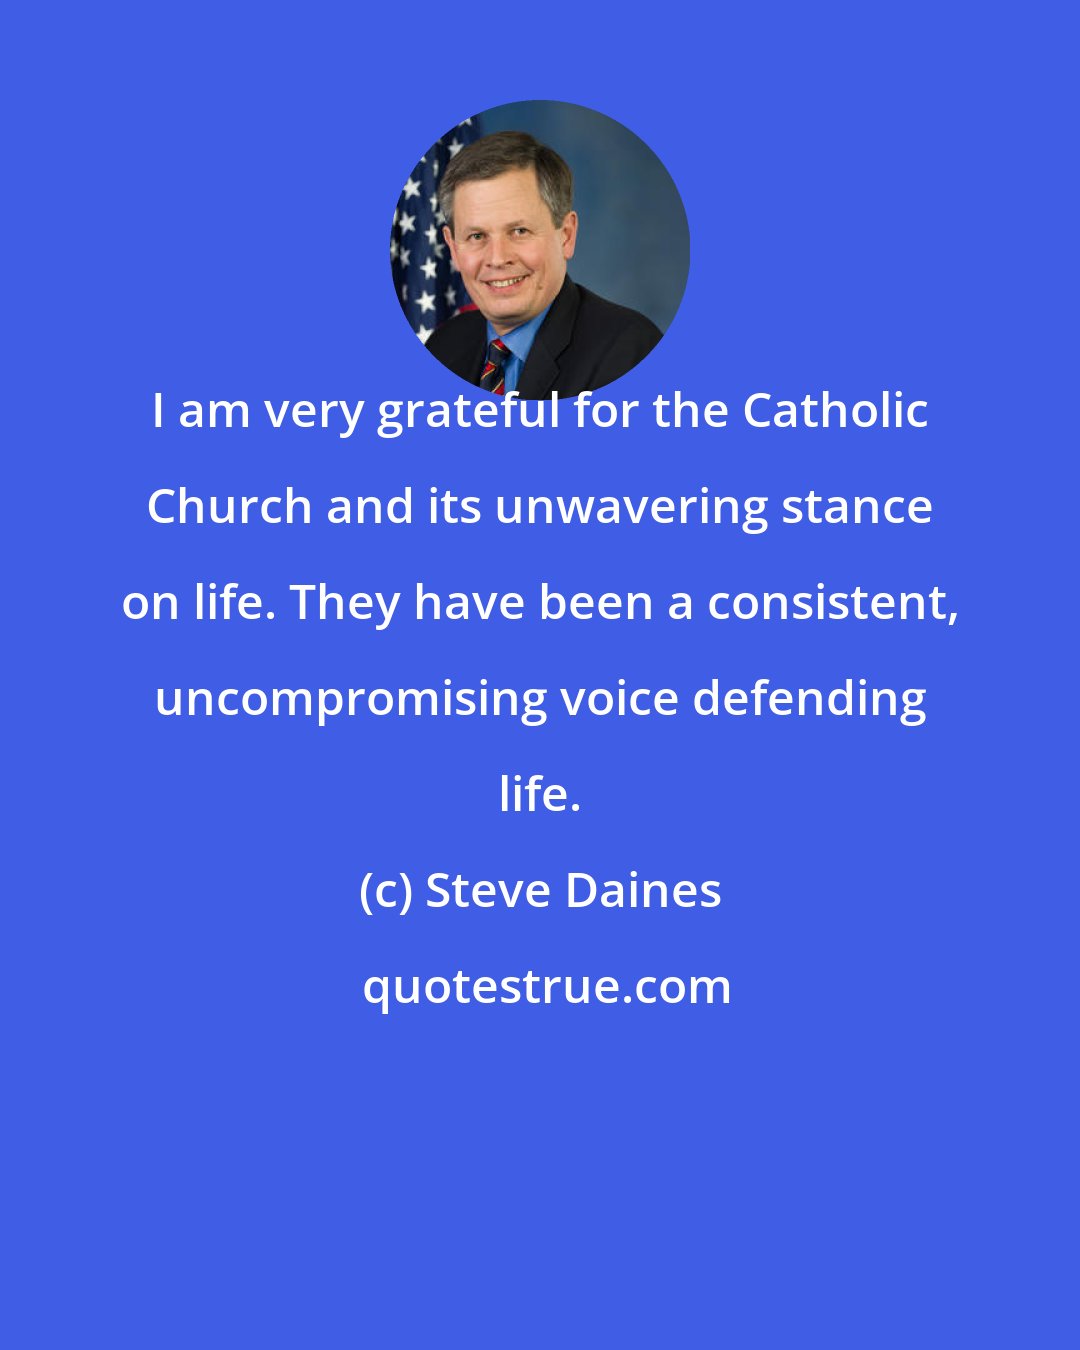 Steve Daines: I am very grateful for the Catholic Church and its unwavering stance on life. They have been a consistent, uncompromising voice defending life.